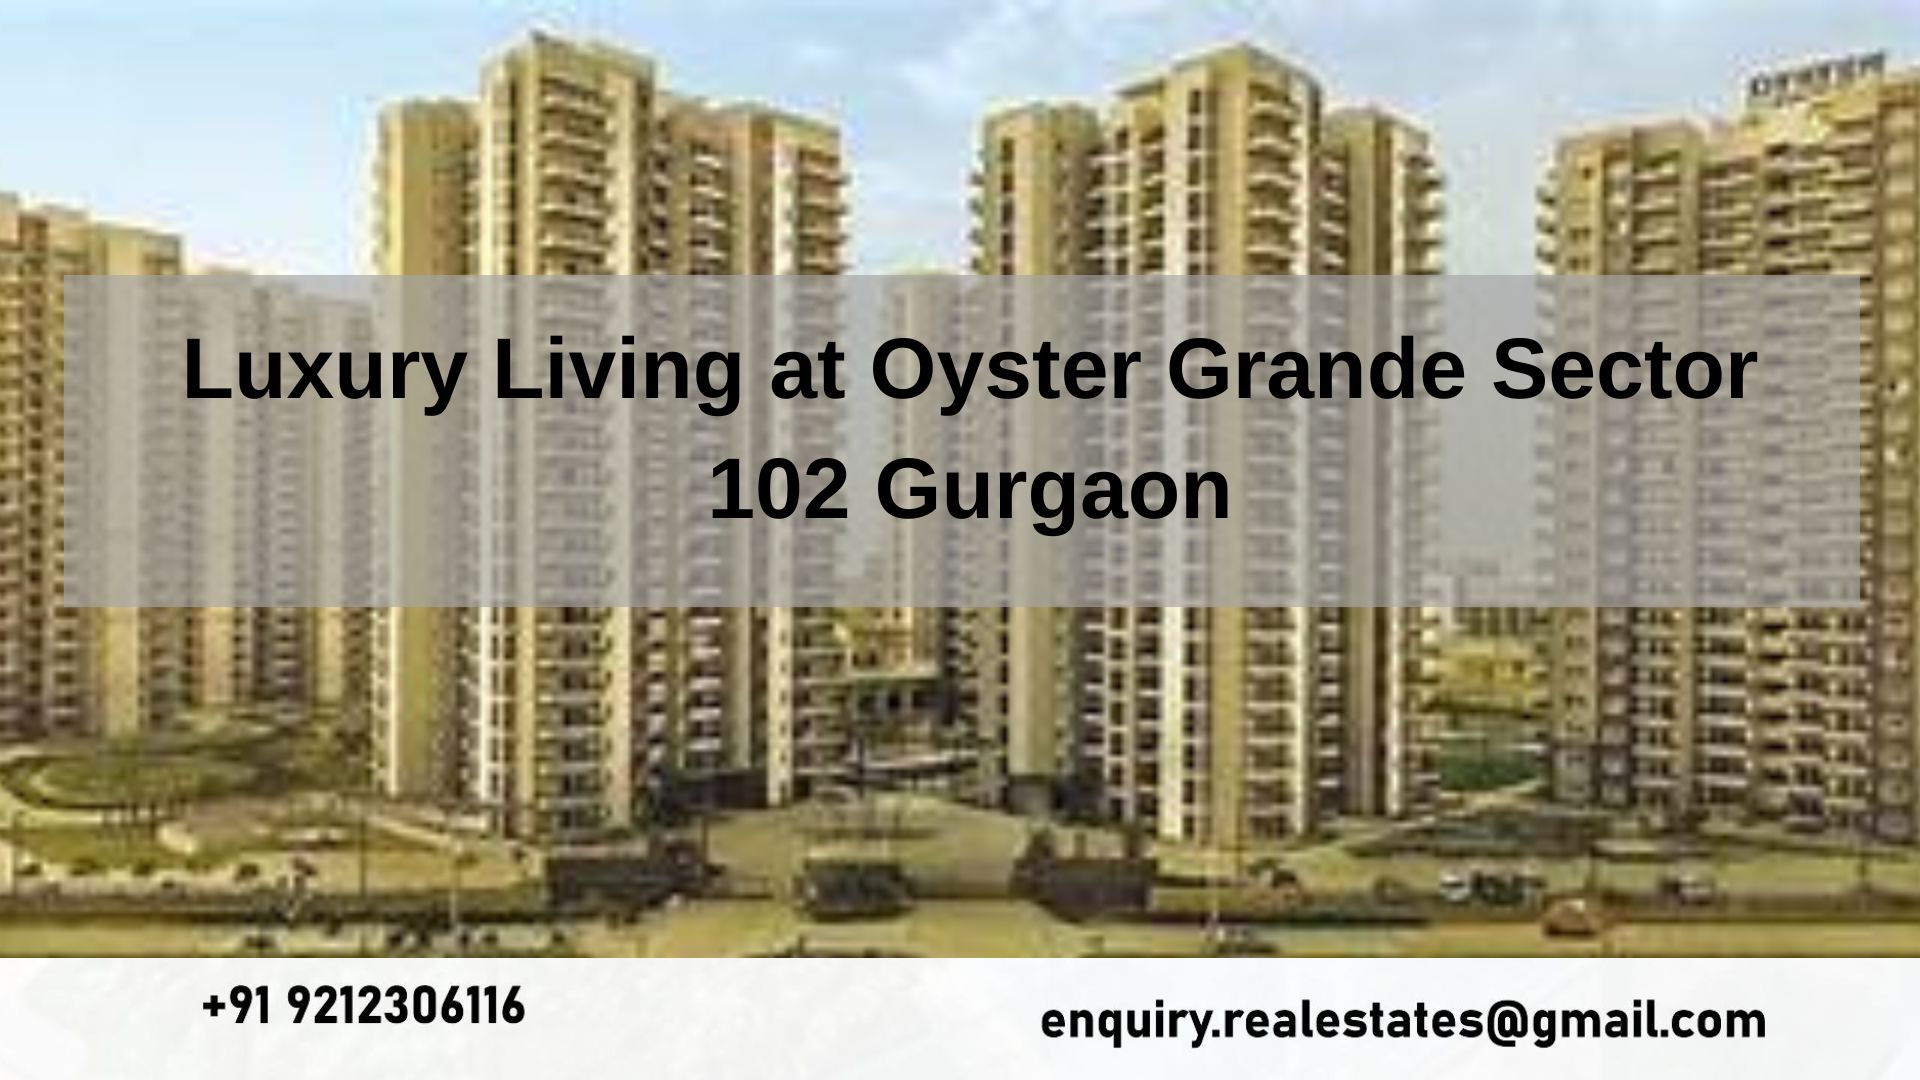 Luxury Living at Oyster Grande Sector 102 Gurgaon